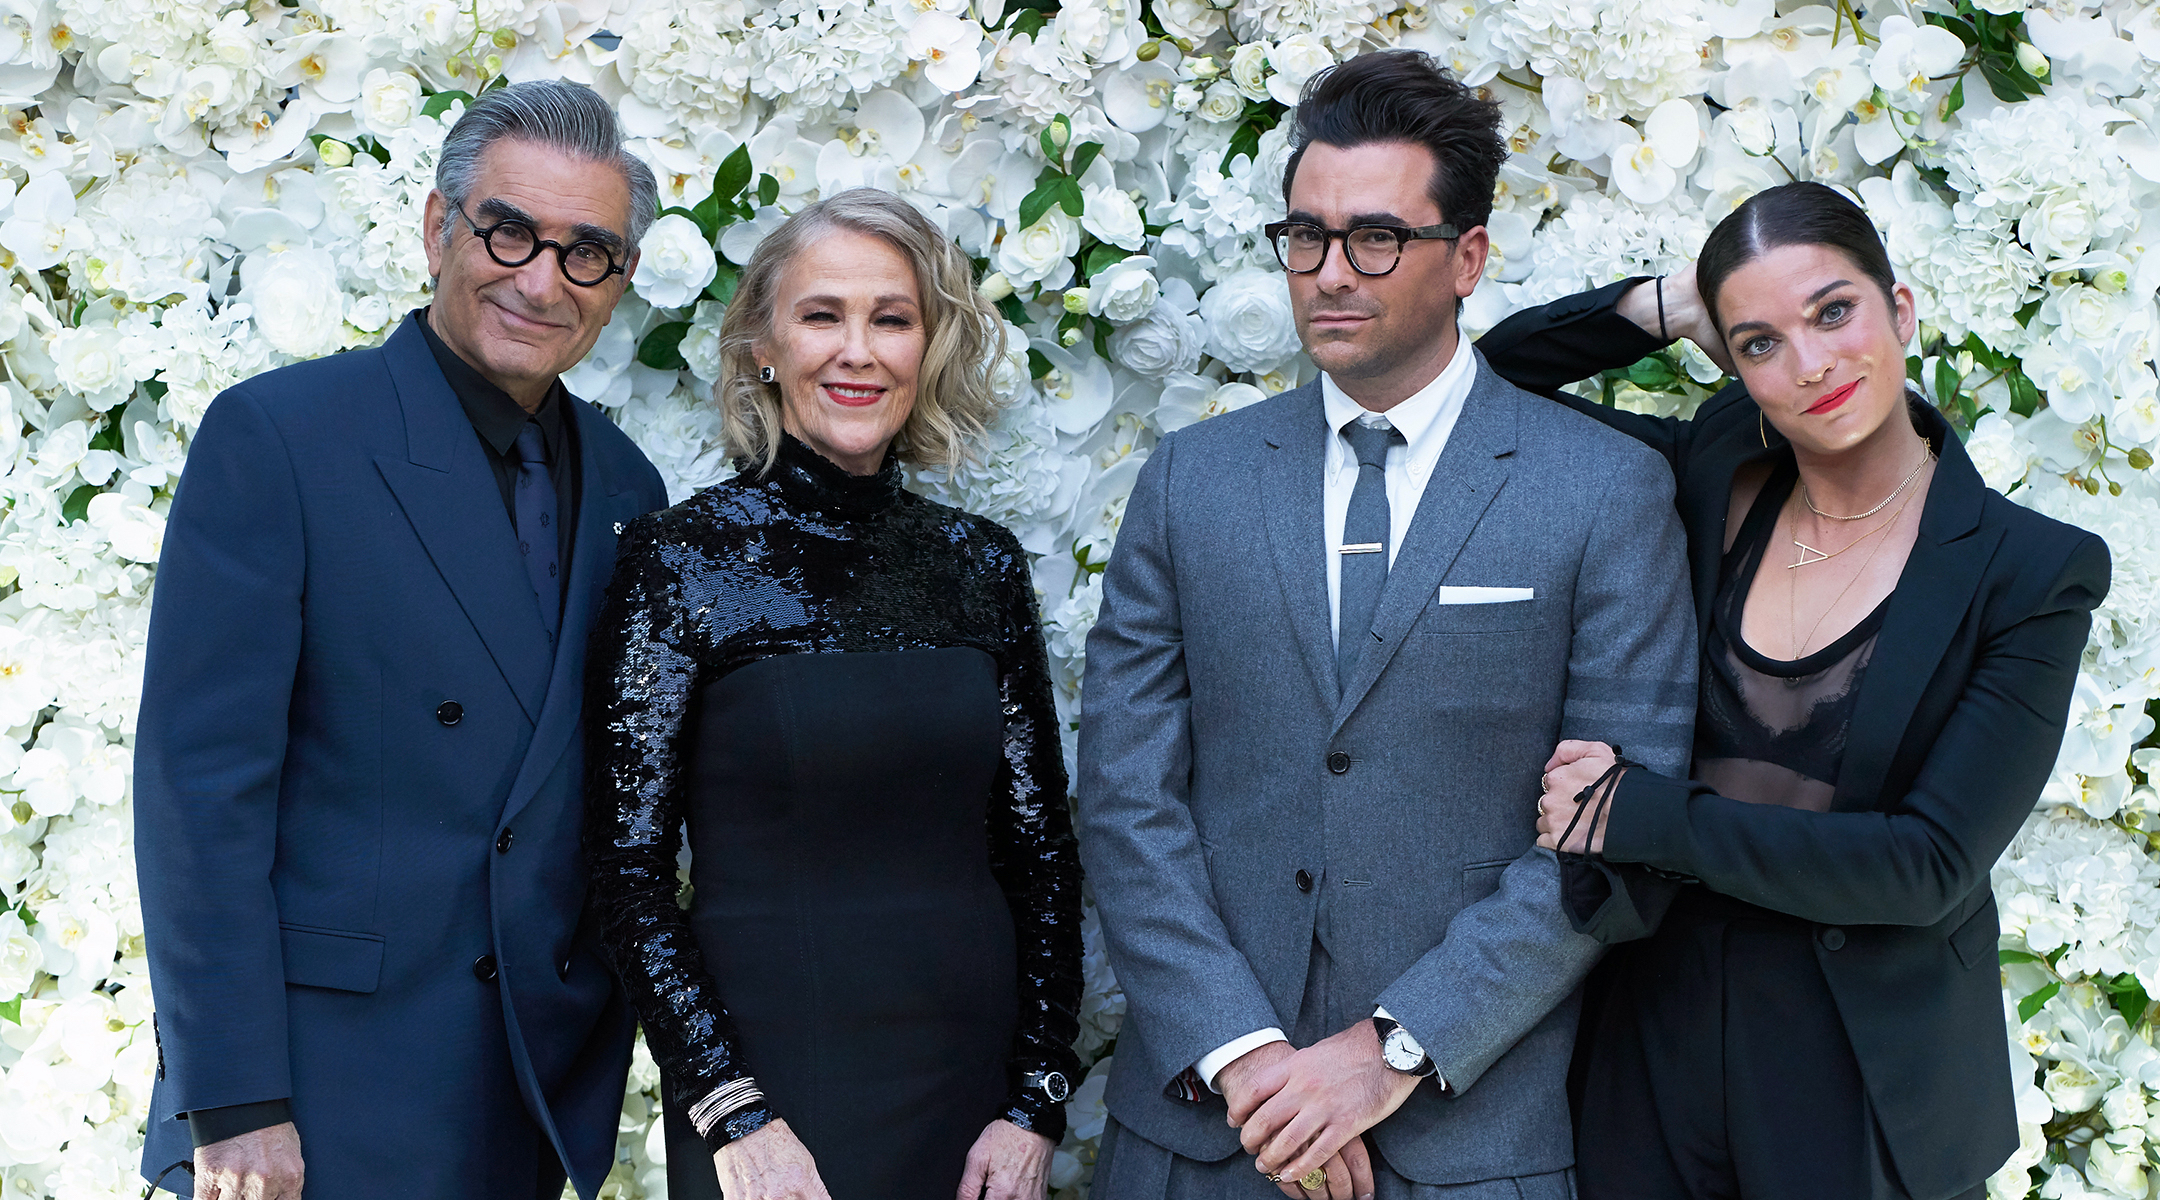 ‘Schitt’s Creek’ sweeps the 2020 Emmys and makes history